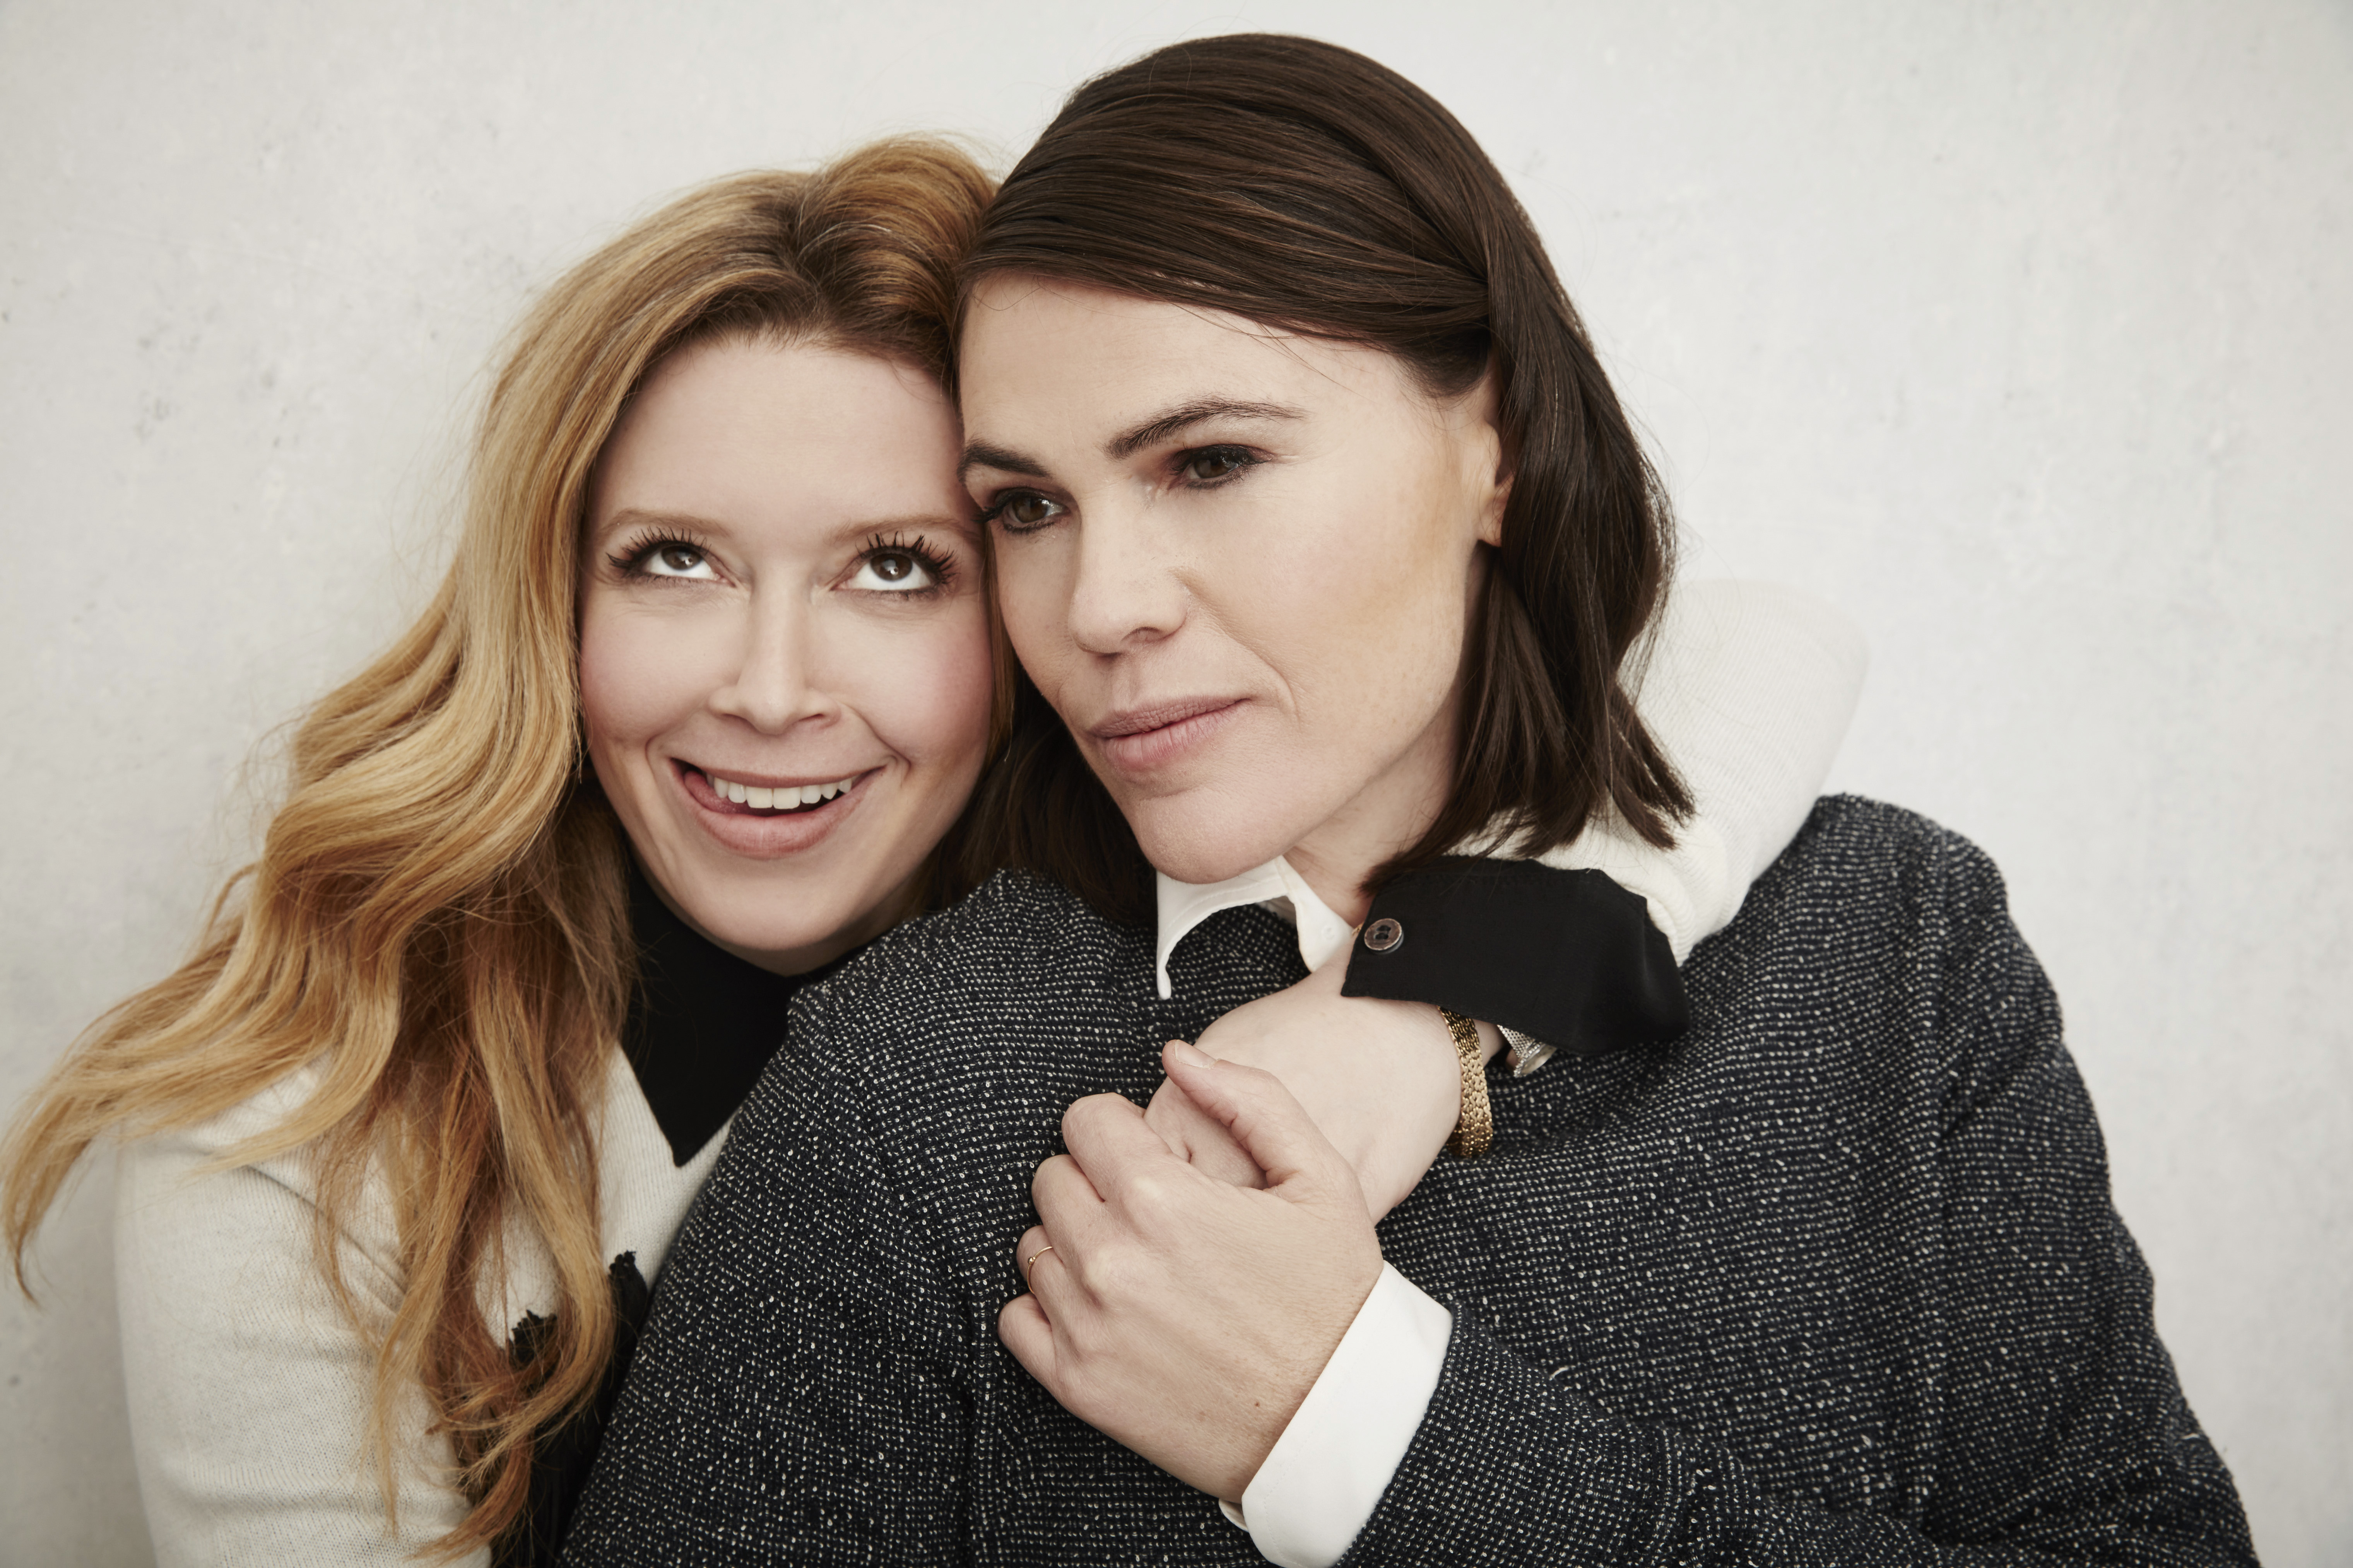 Clea DuVall and Natasha Lyonne from 'The Intervention' pose at the 2016 Sundance Film Festival Getty Images Portrait Studio on January 26, 2016 in Park City, Utah.